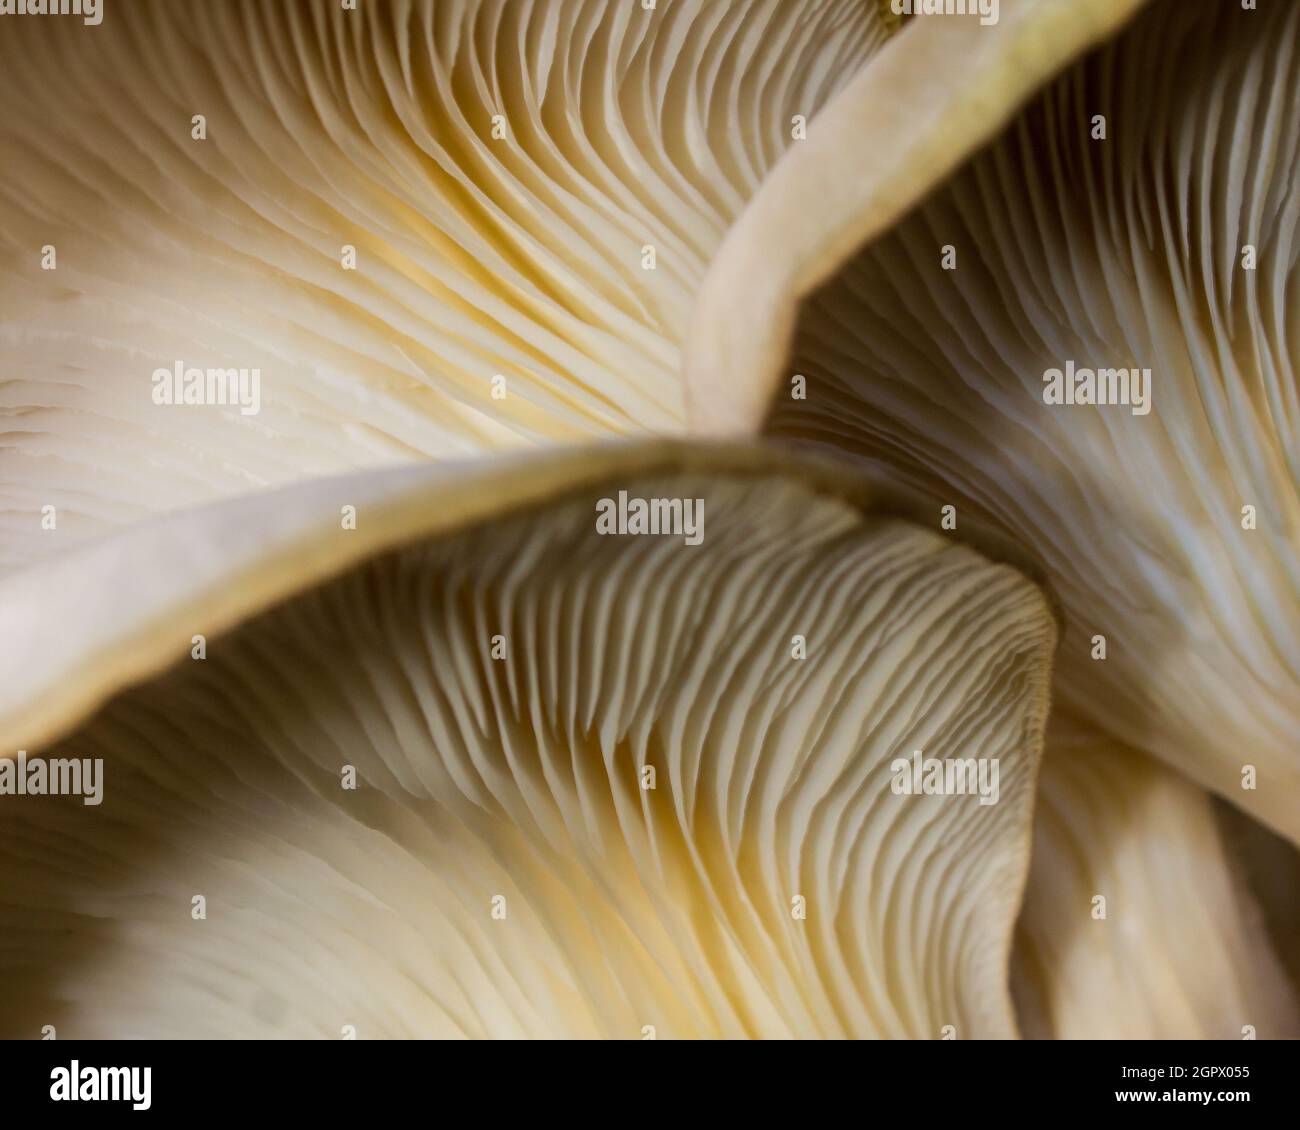 Abstract close-up view of the gills of the beige colored Oyster Mushrooms, Pleurotus Ostreatus Stock Photo